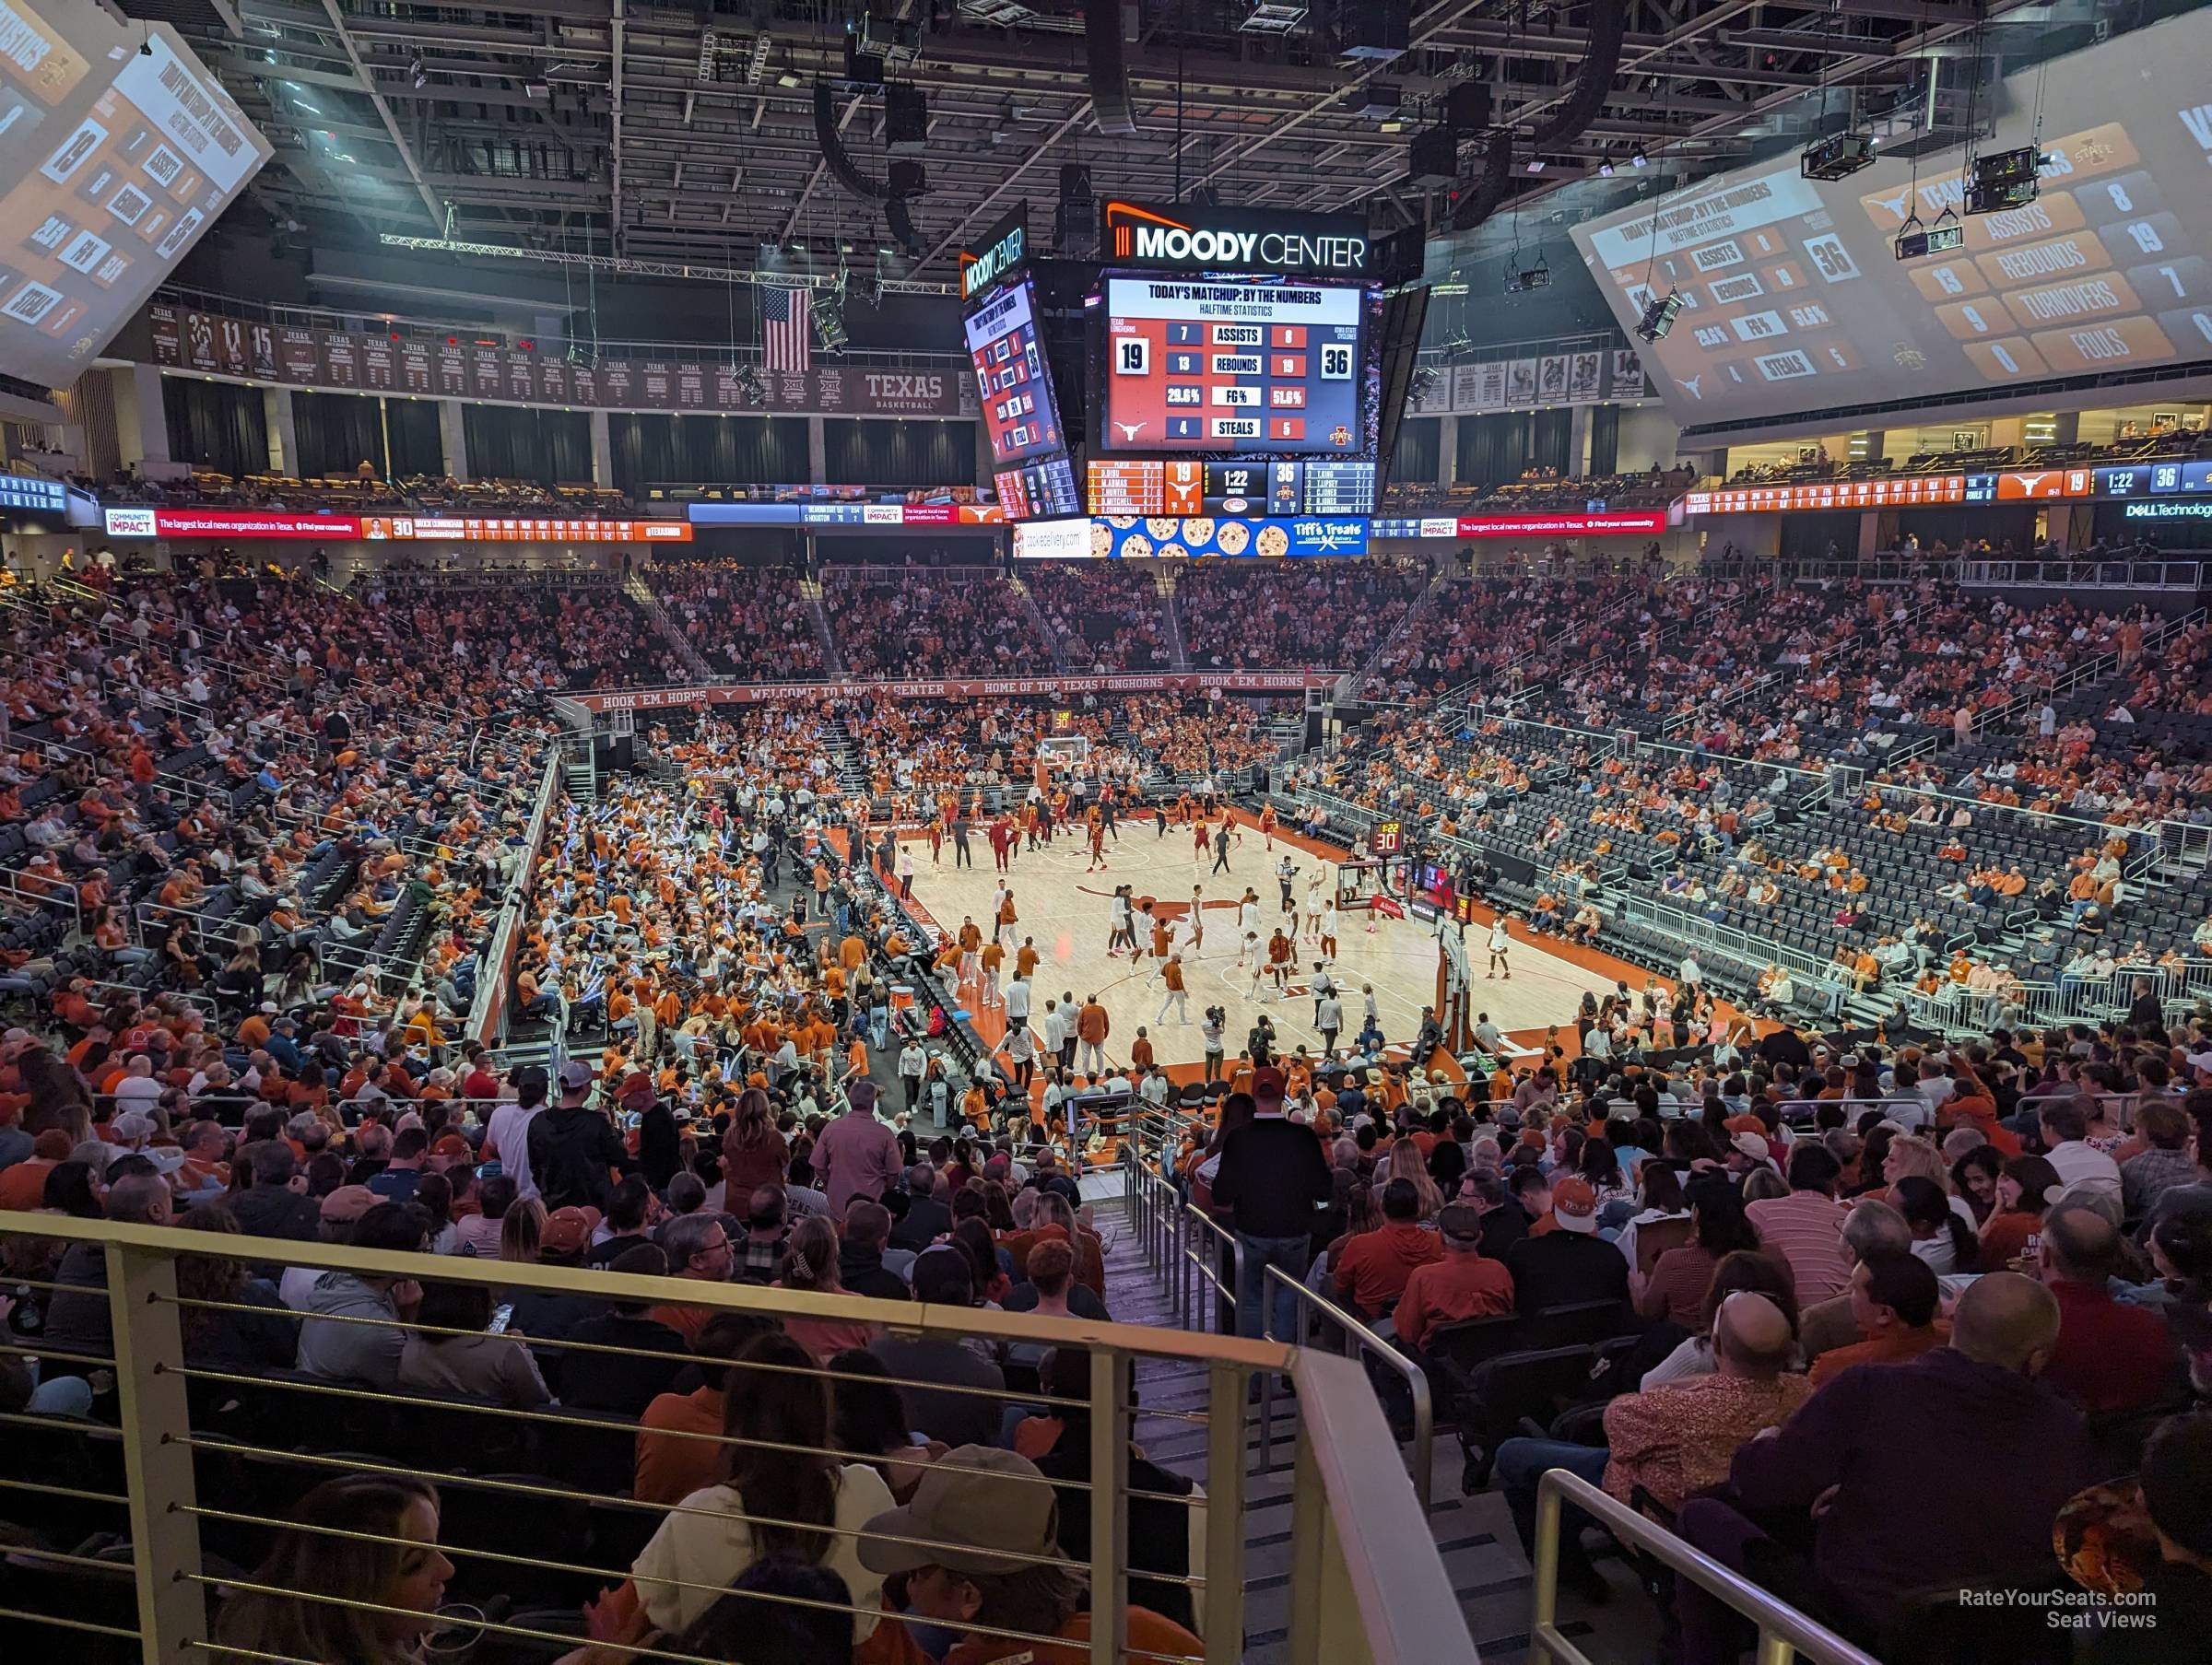 section 114 seat view  for basketball - moody center atx